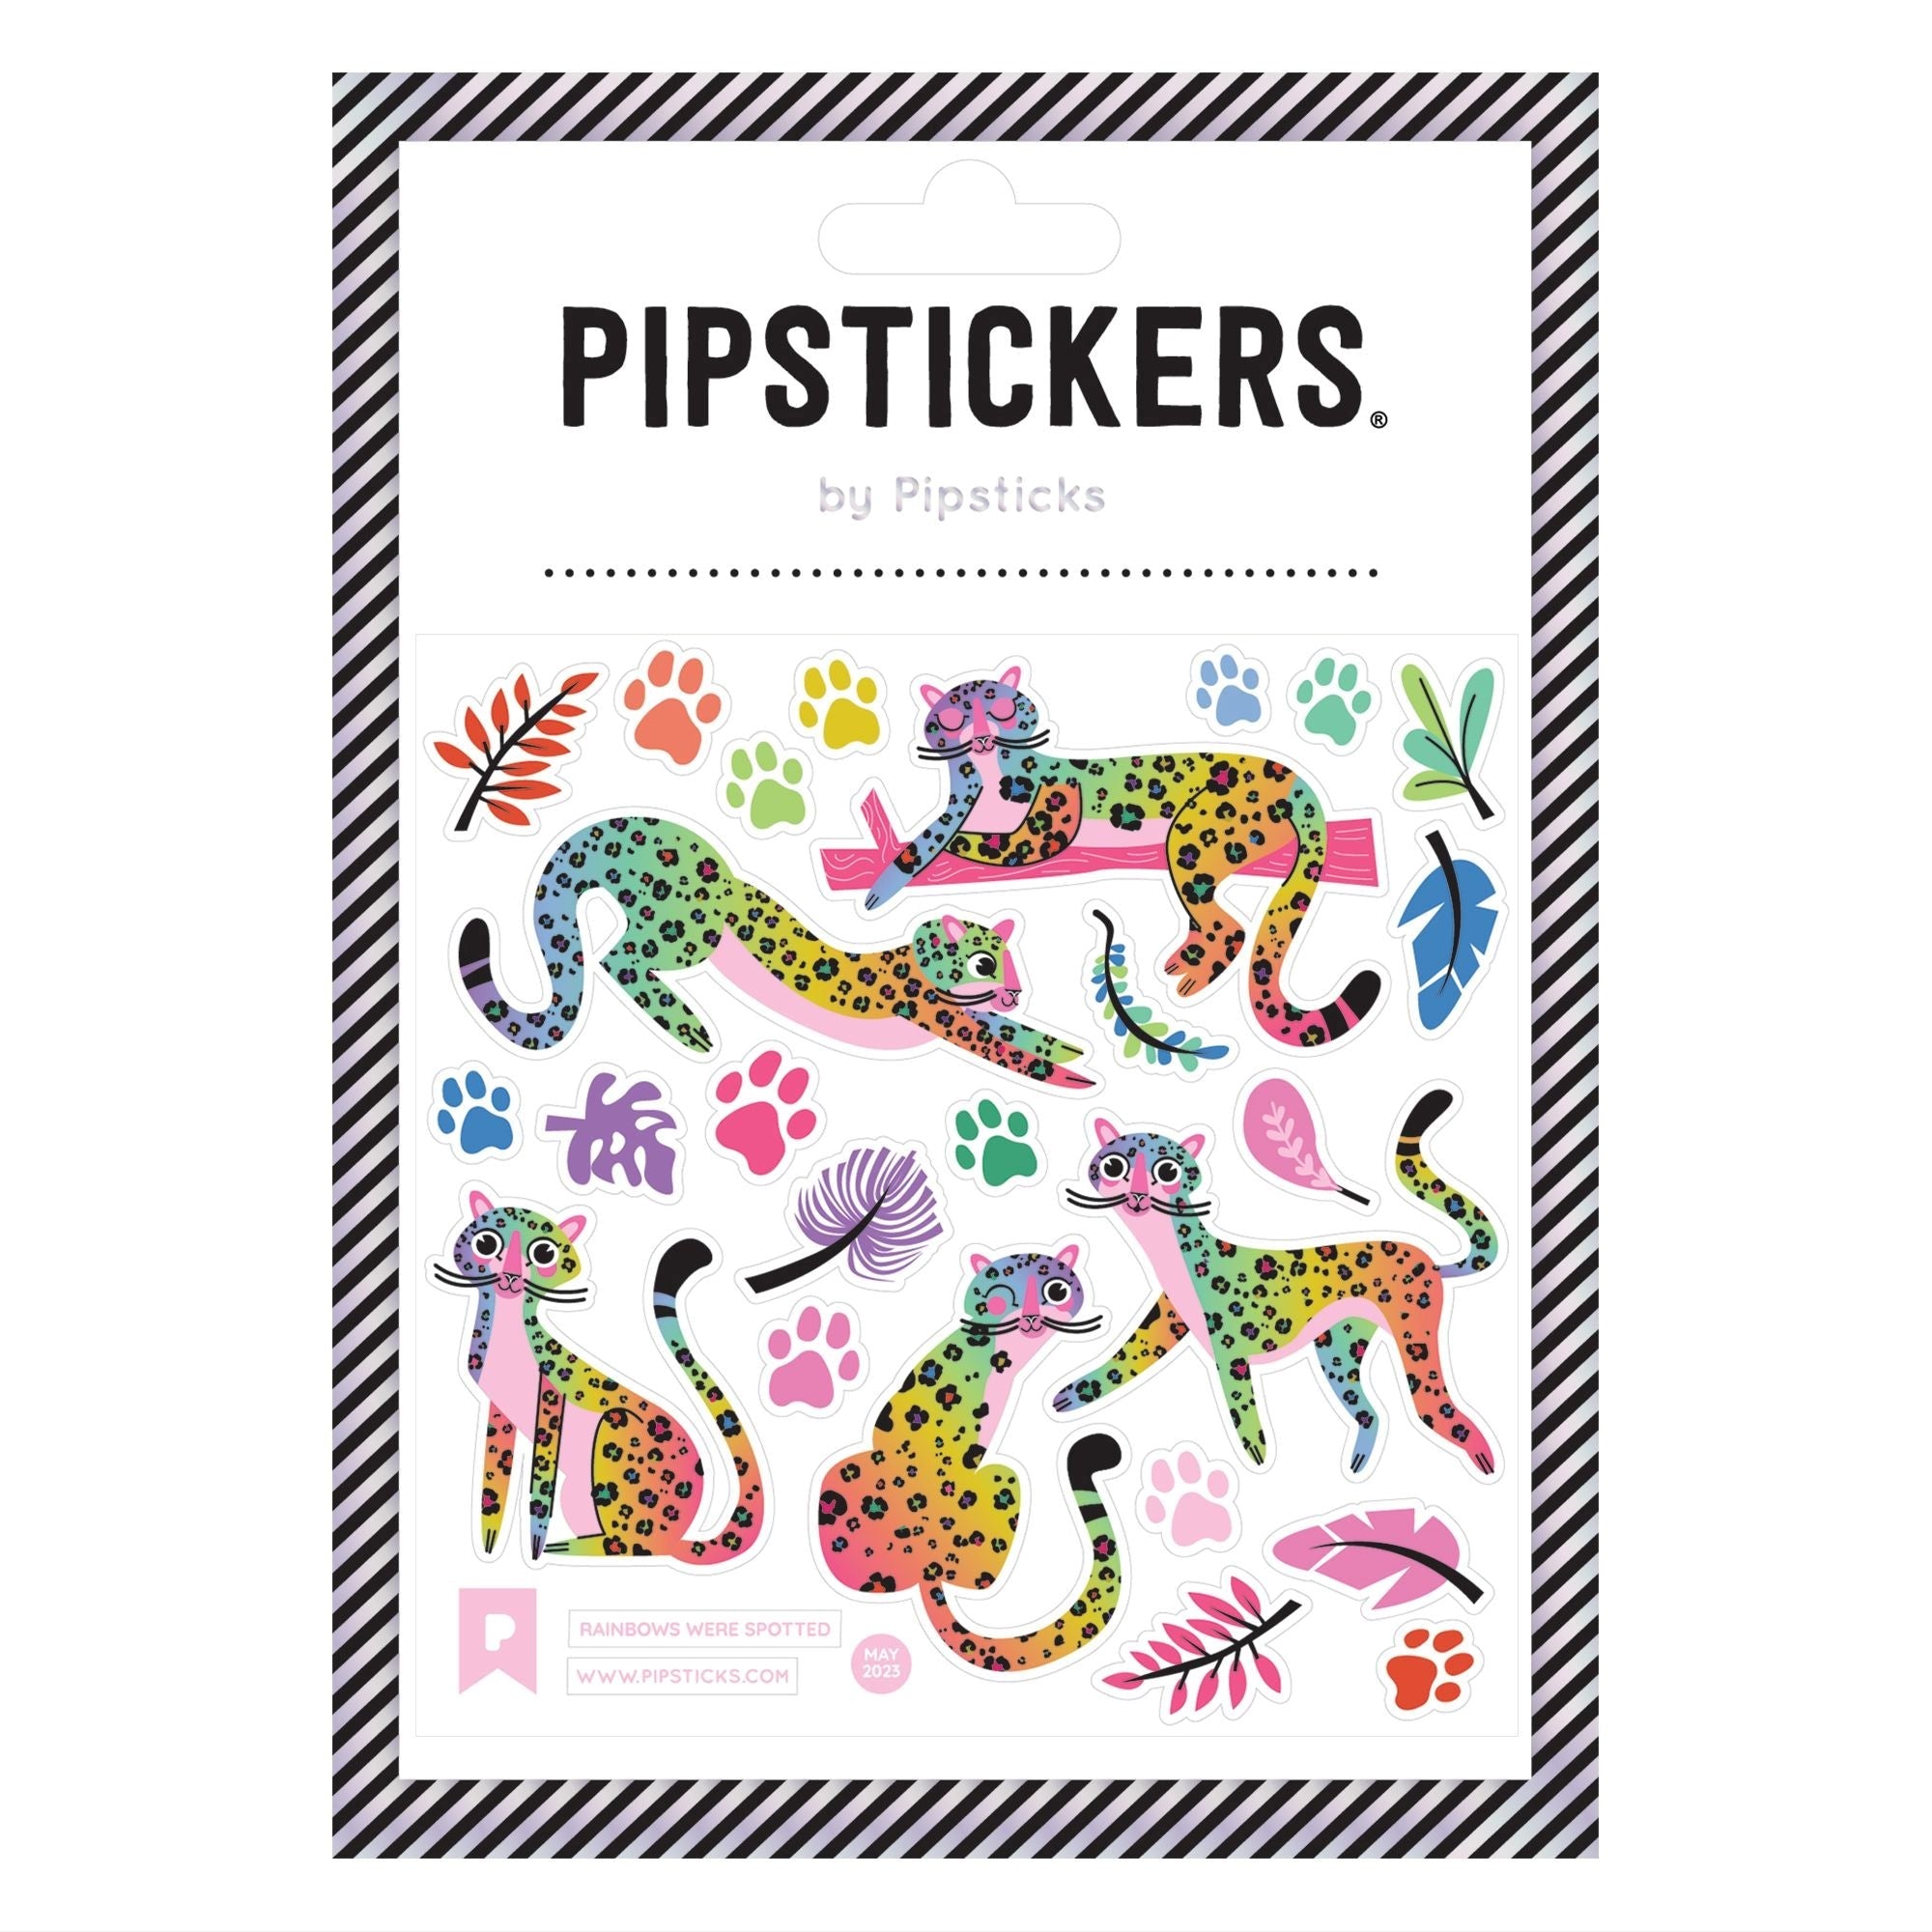 Pipstickers | Rainbows Were Spotted